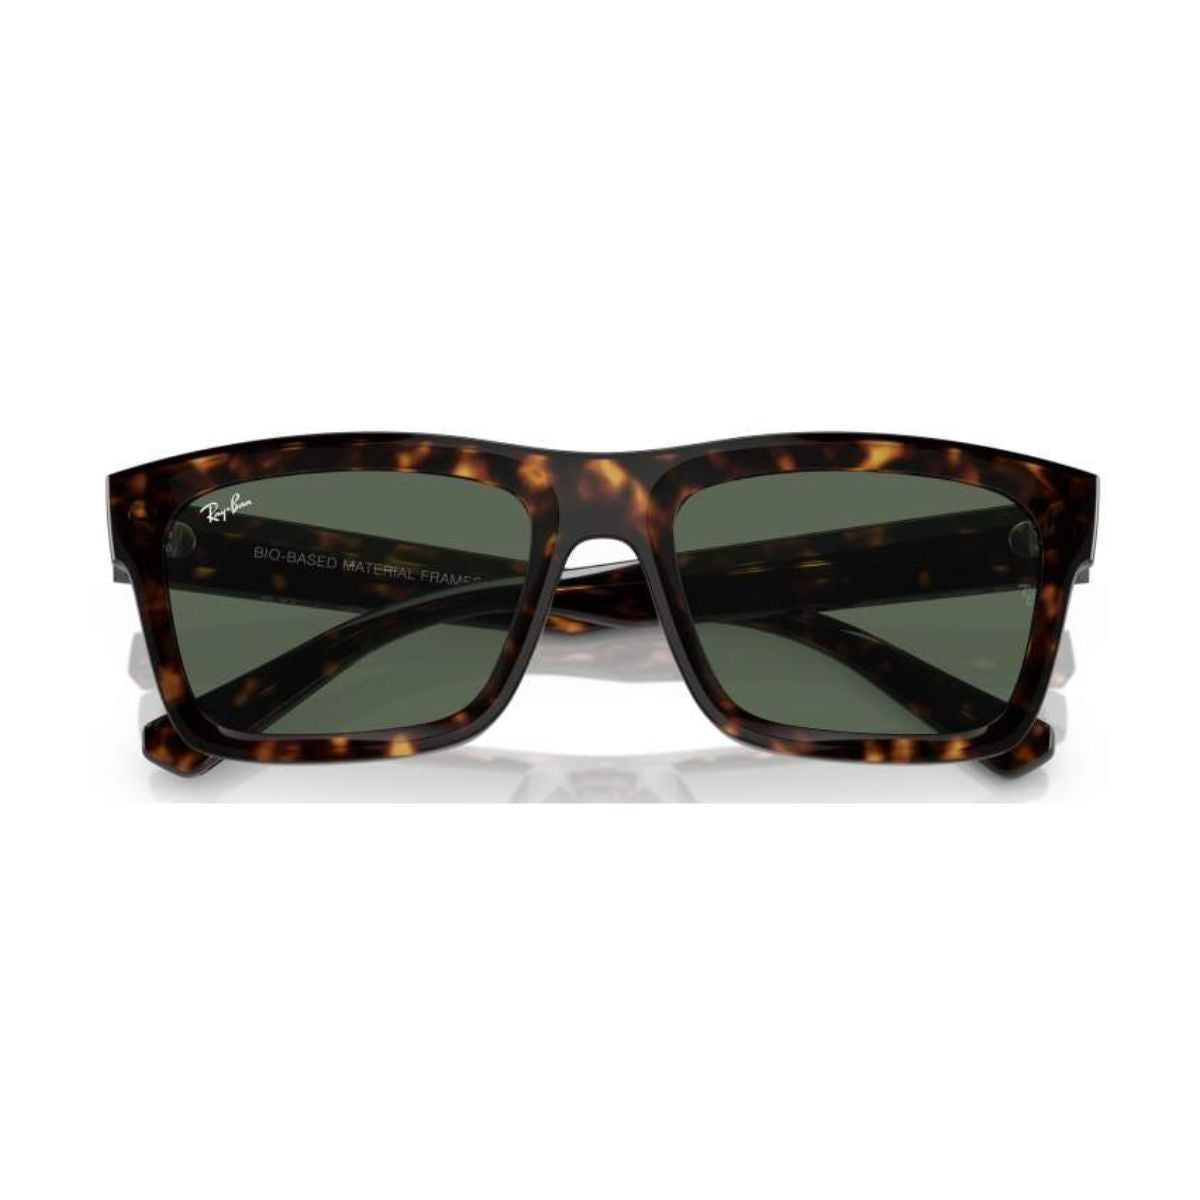 " Rayban 4396 1359/71 Sunglasses for Men's And Women's UV Safety Online At Optorium"